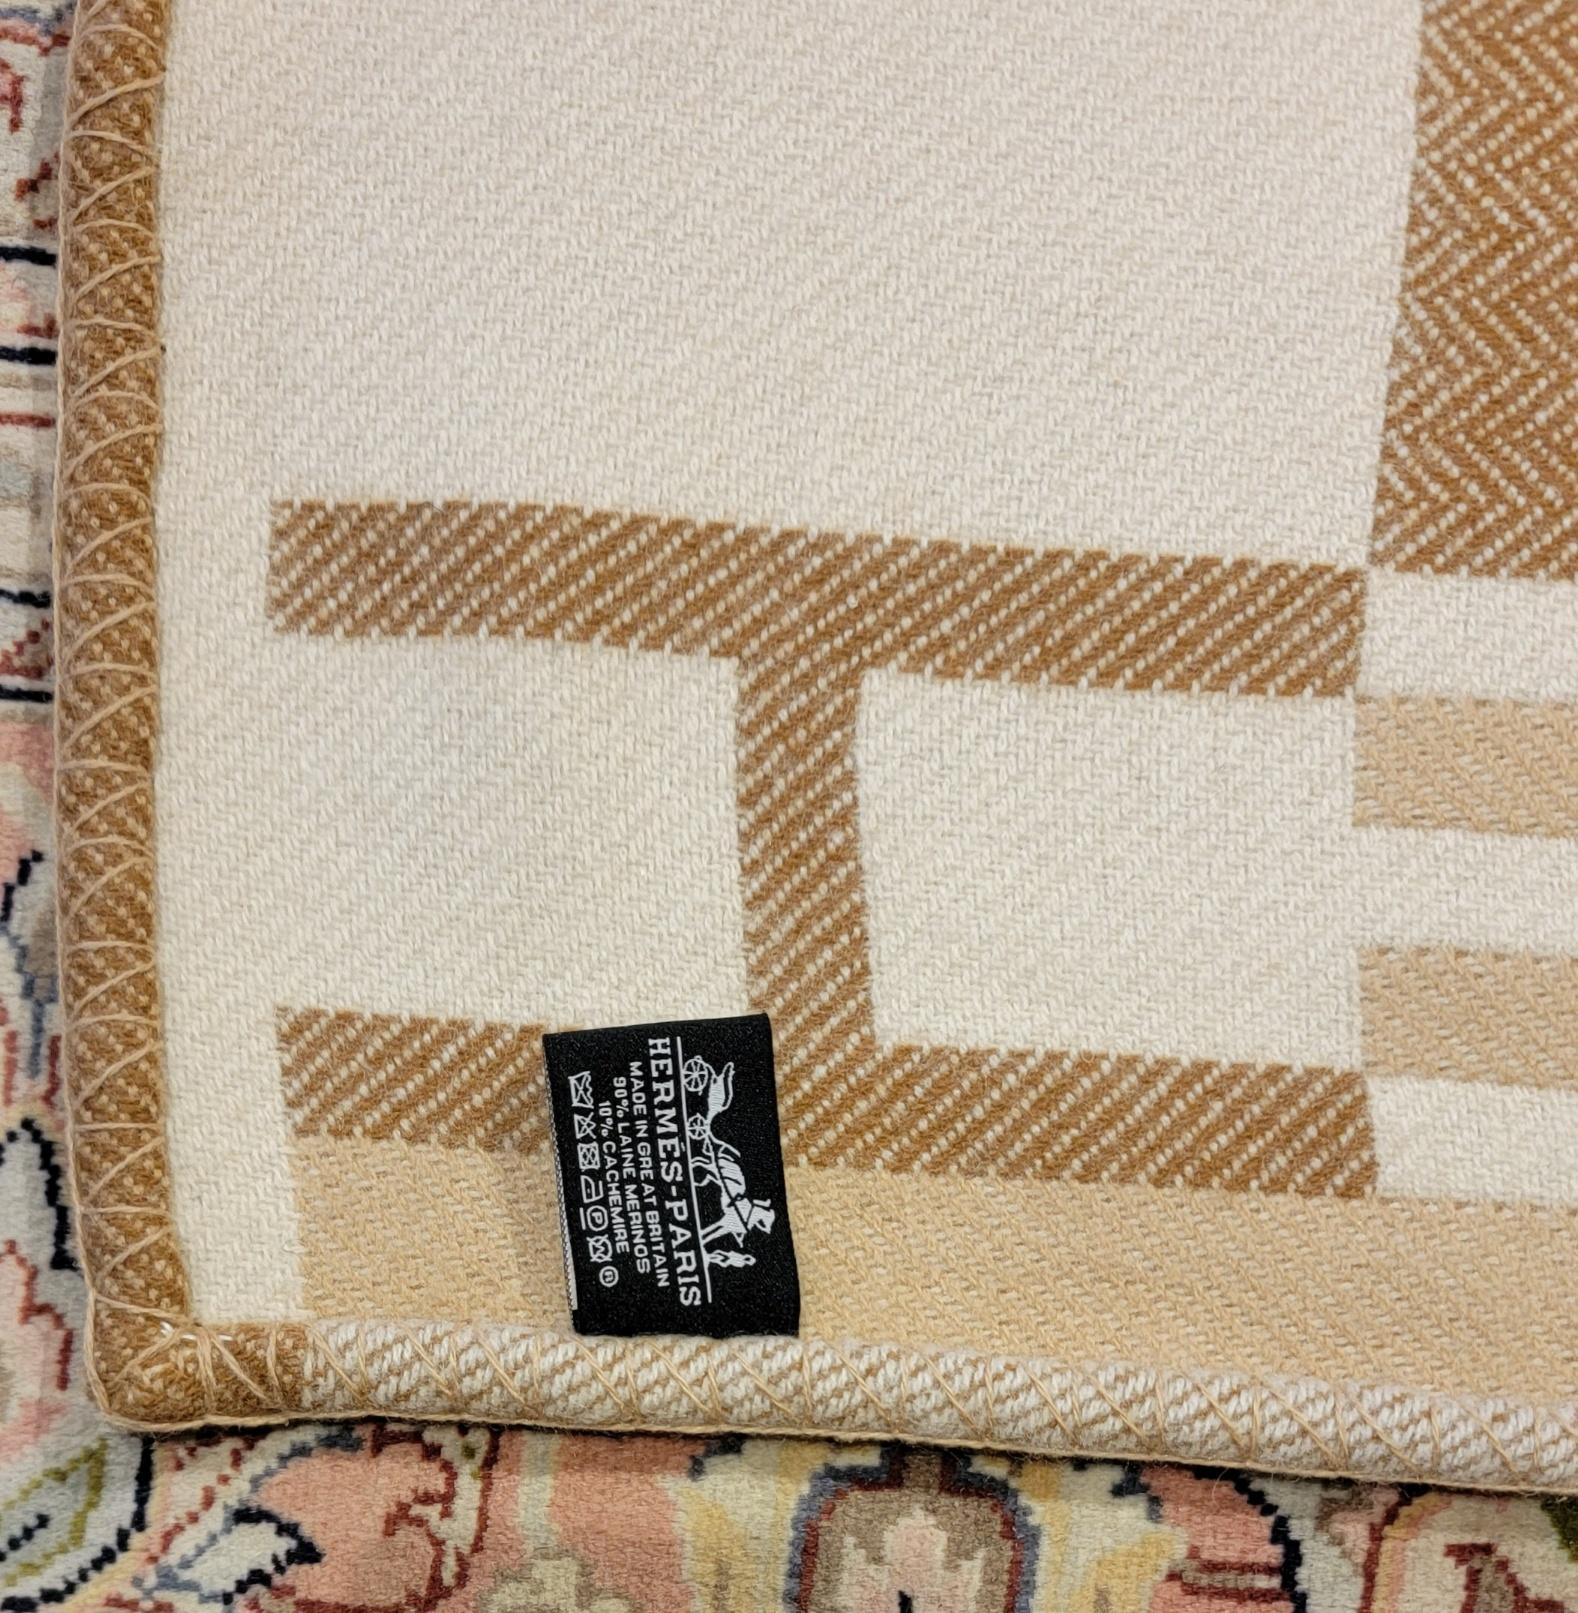 Hermes Vibration Throw Blanket and pillows  In Good Condition For Sale In Pasadena, CA